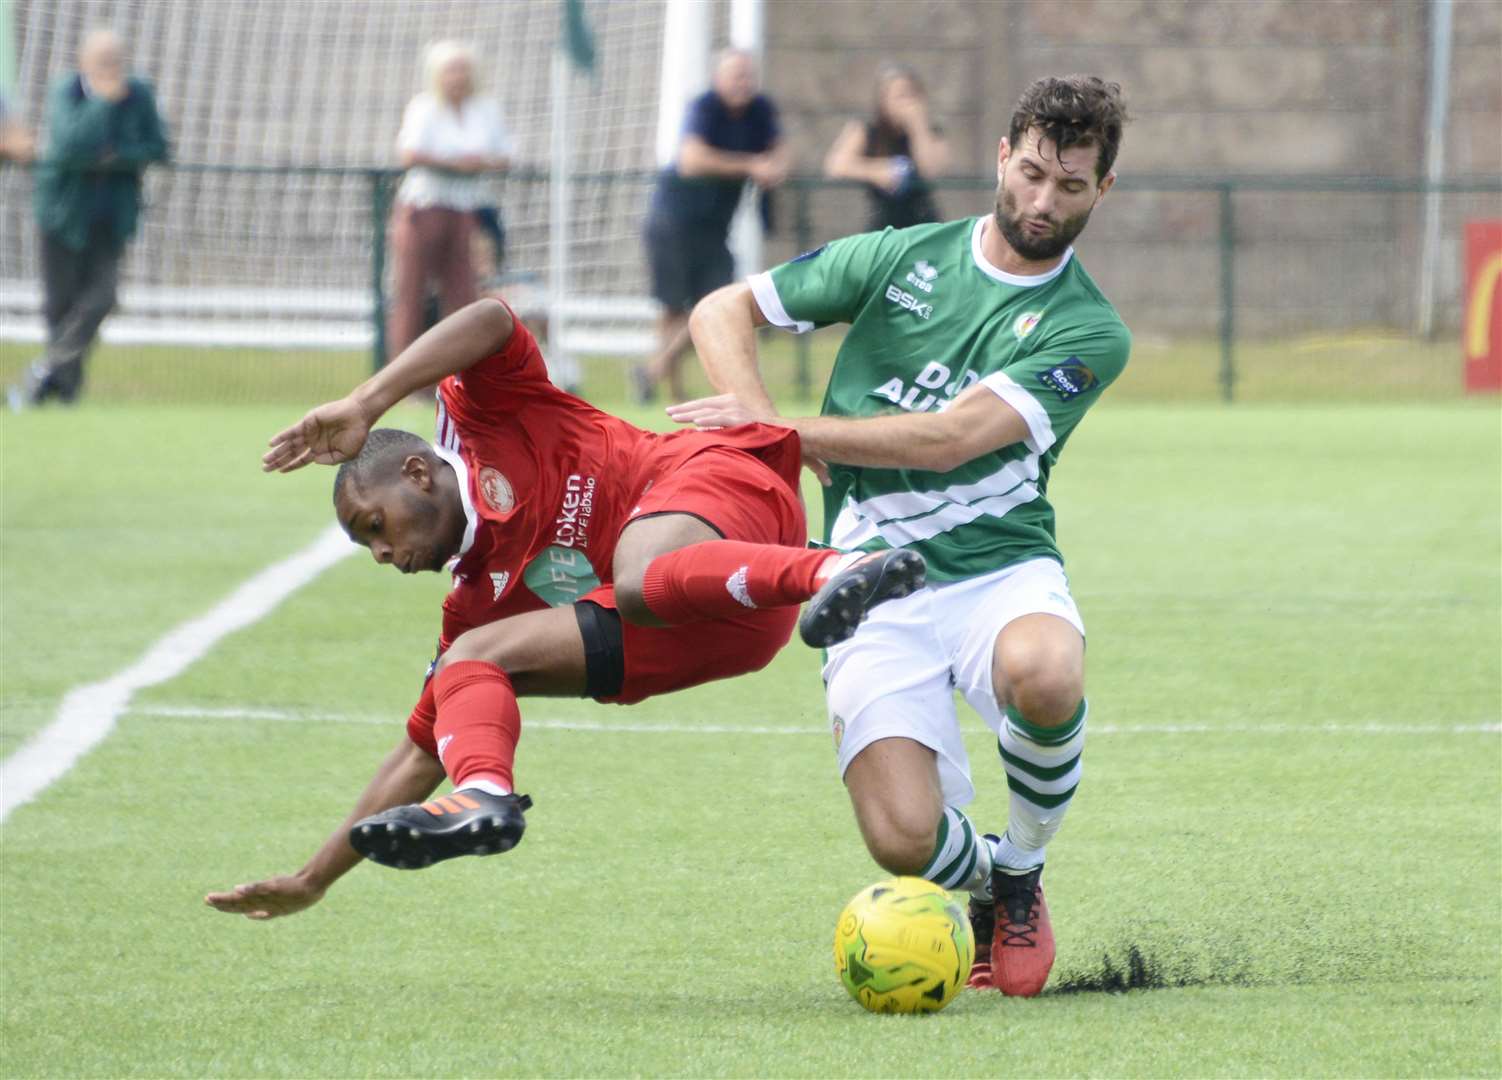 Hythe's Kieron Campbell is upended during the 3-1 defeat at Ashford Picture: Paul Amos